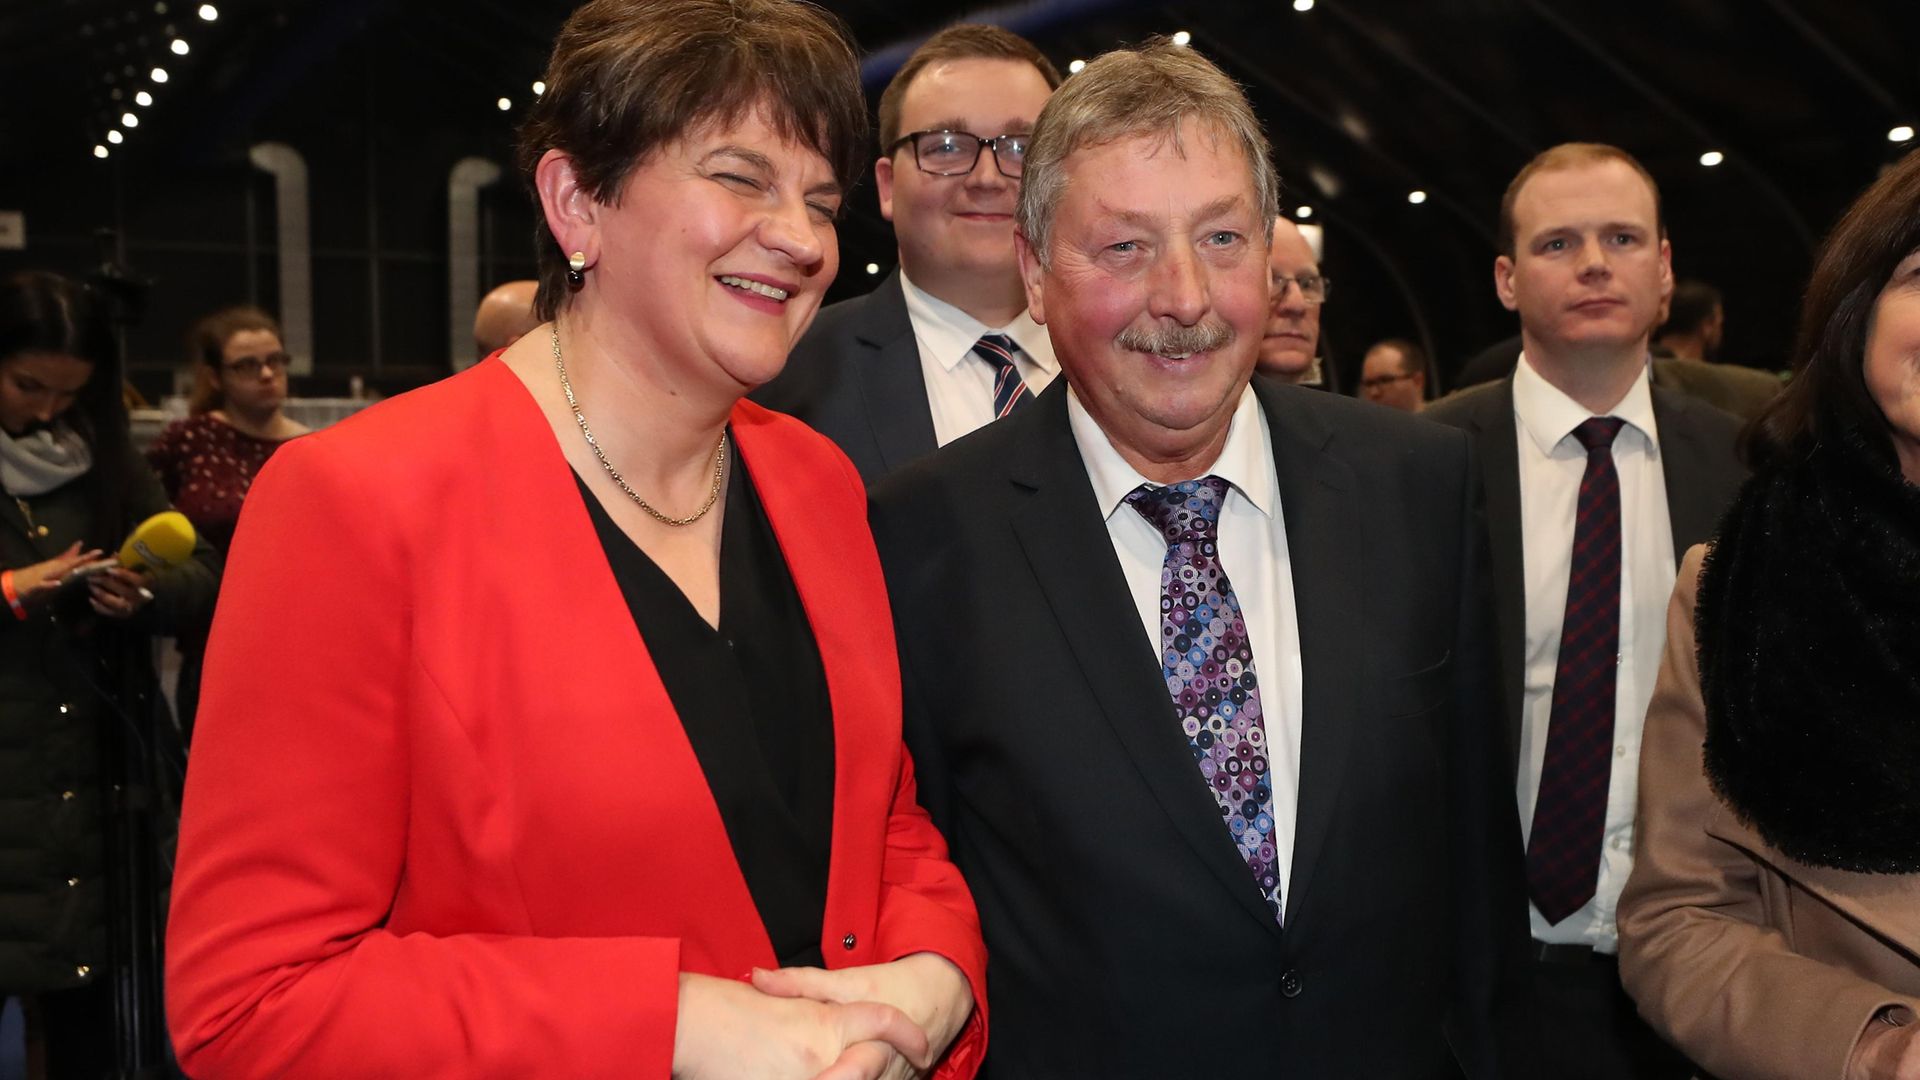 The DUP's Sammy Wilson celebrates with party leader Arlene Foster after winning the South Down seat at the Titanic exhibition centre, Belfast, for the 2019 General Election; Liam McBurney/ PA Images - Credit: PA